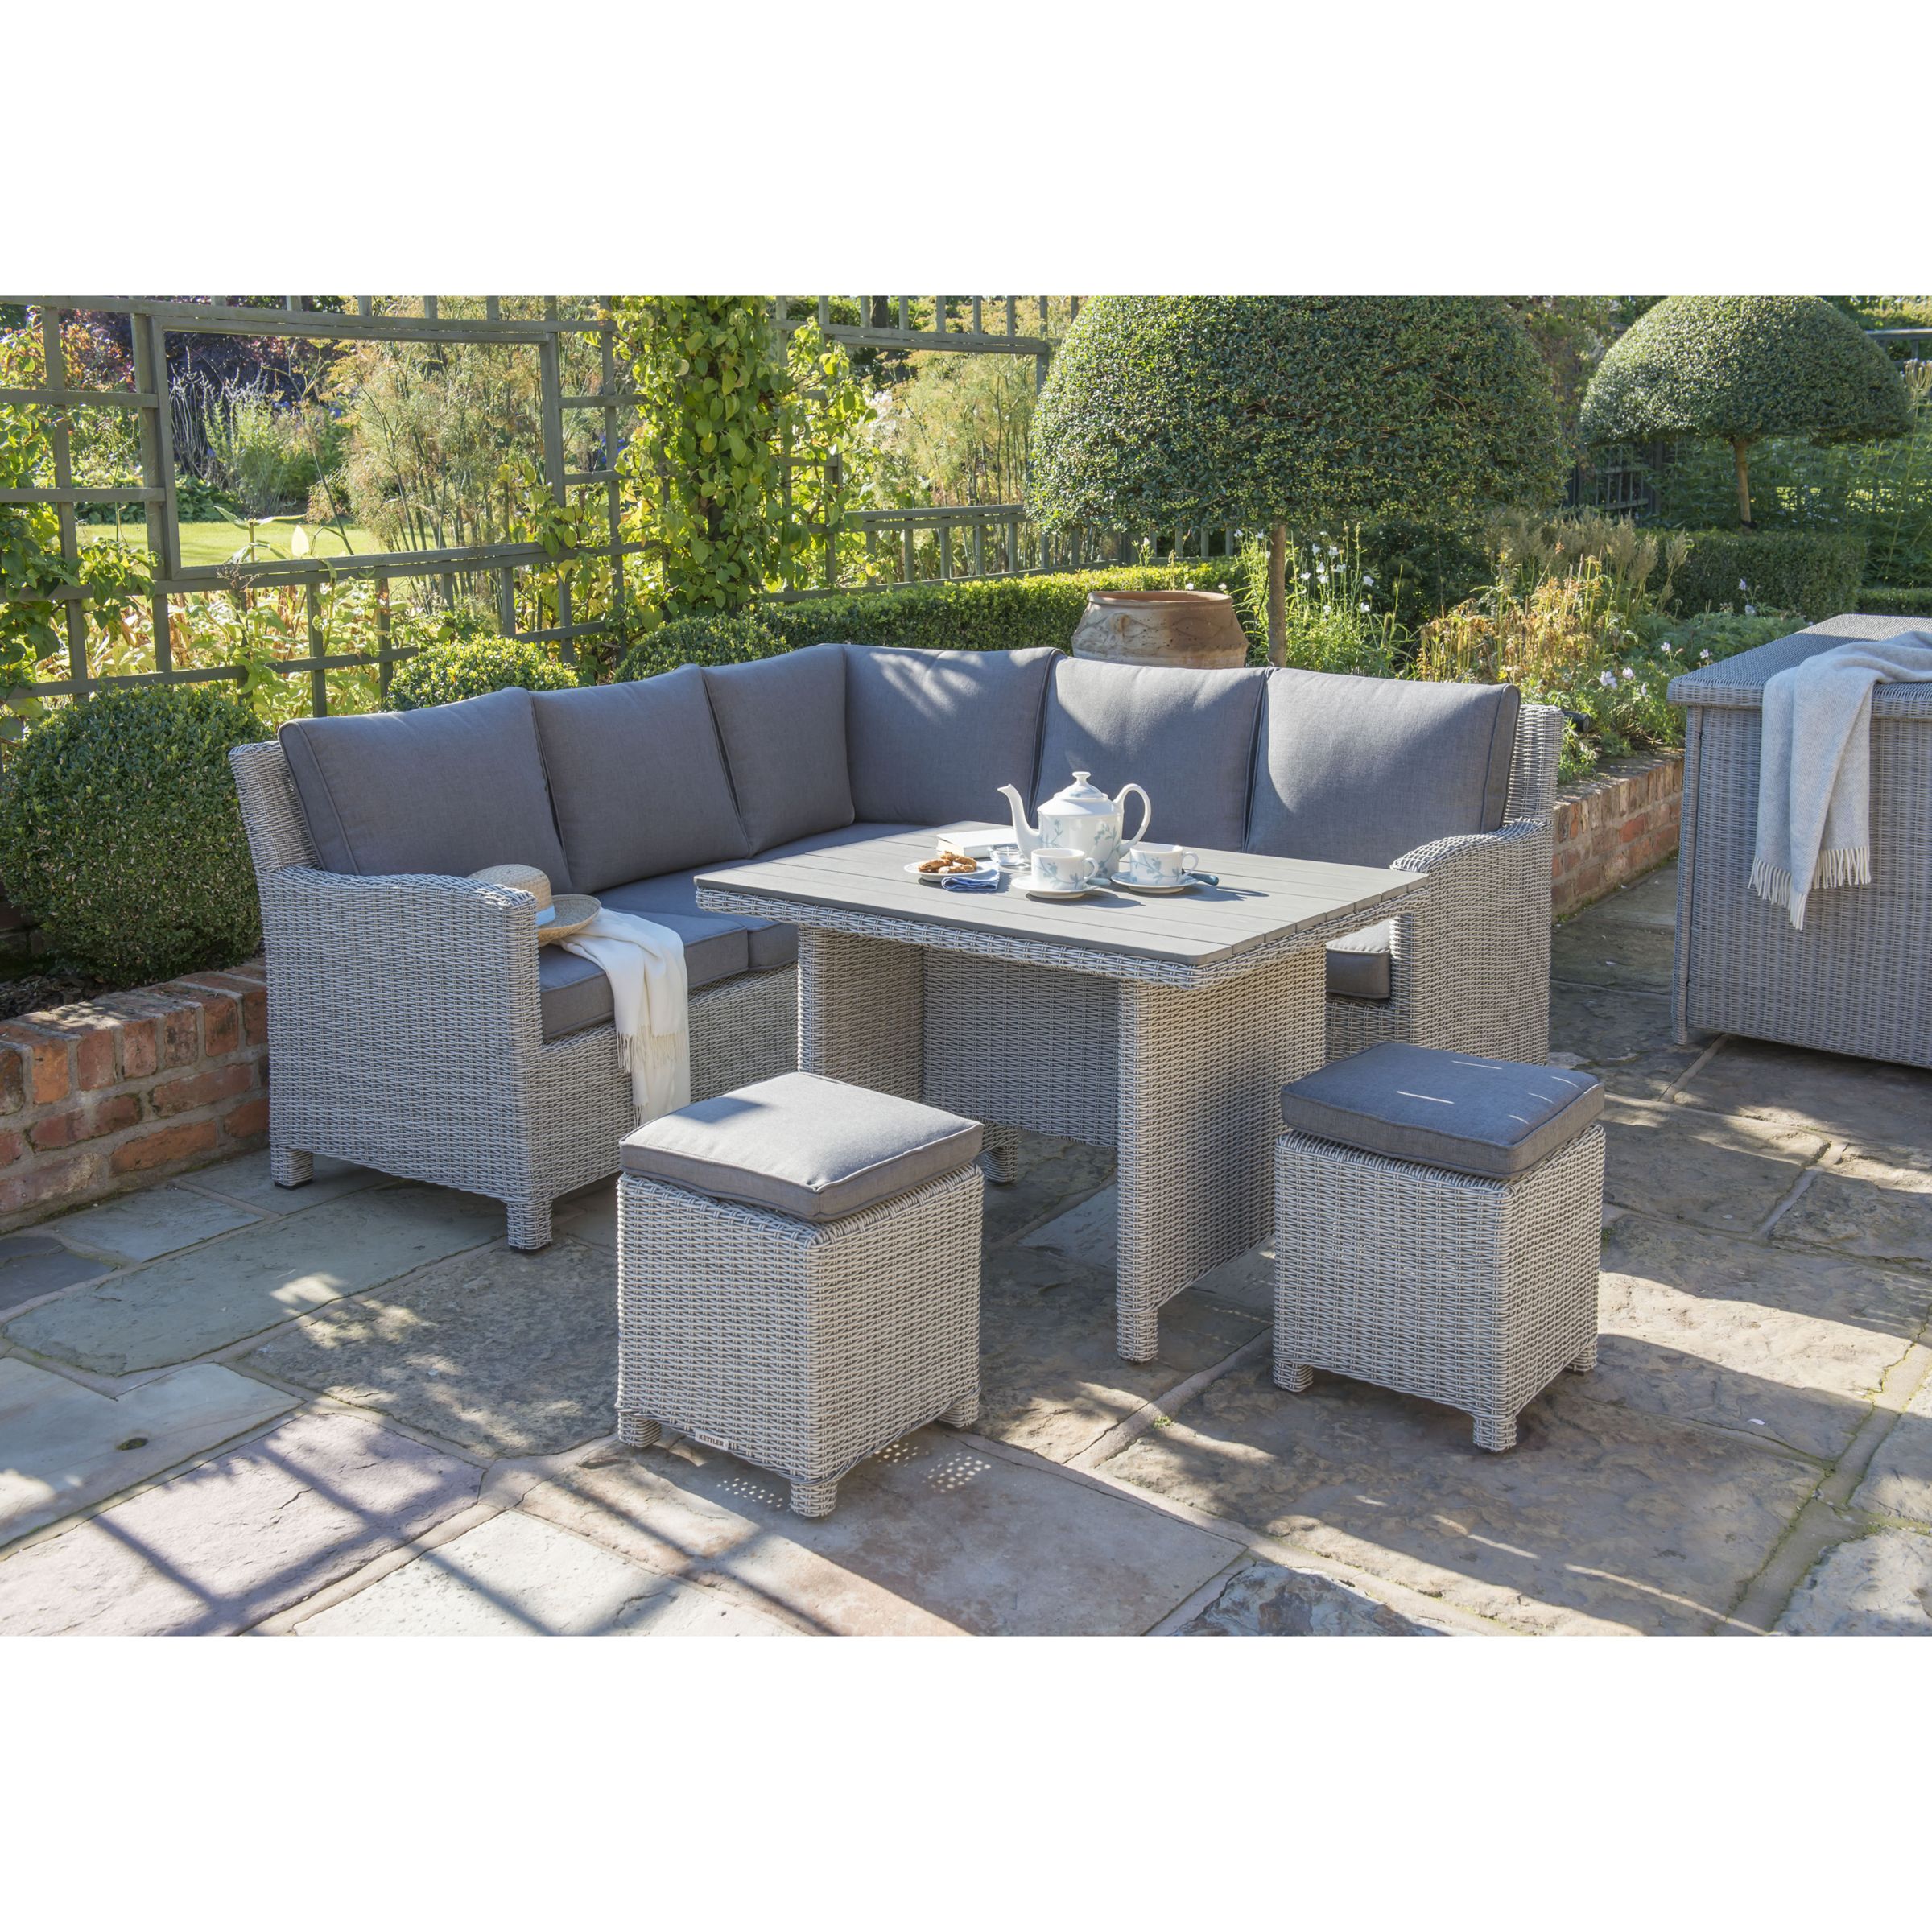 Photo of Kettler palma 7-seater corner garden mini casual dining set with wood-effect top table